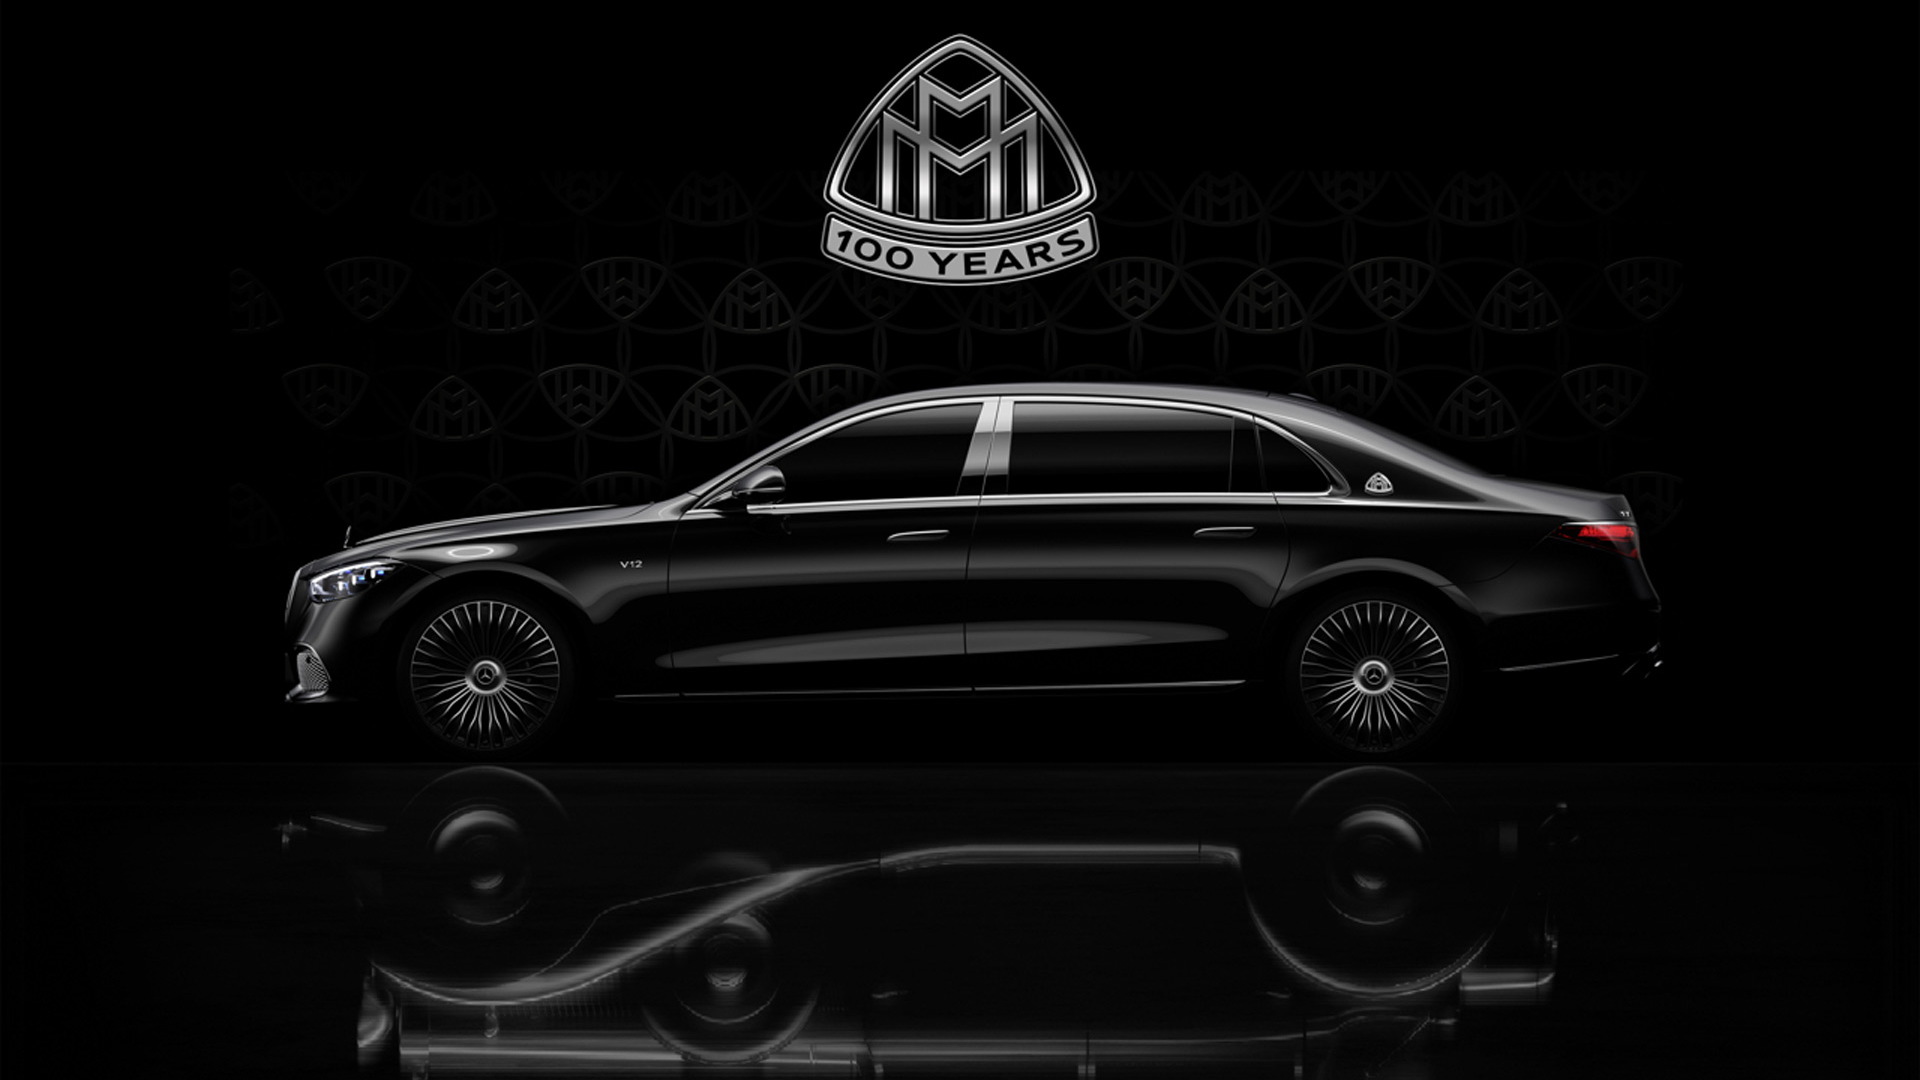 Mercedes-Benz Maybach in 2021 will celebrate 100th anniversary of the launch of Maybach's first car